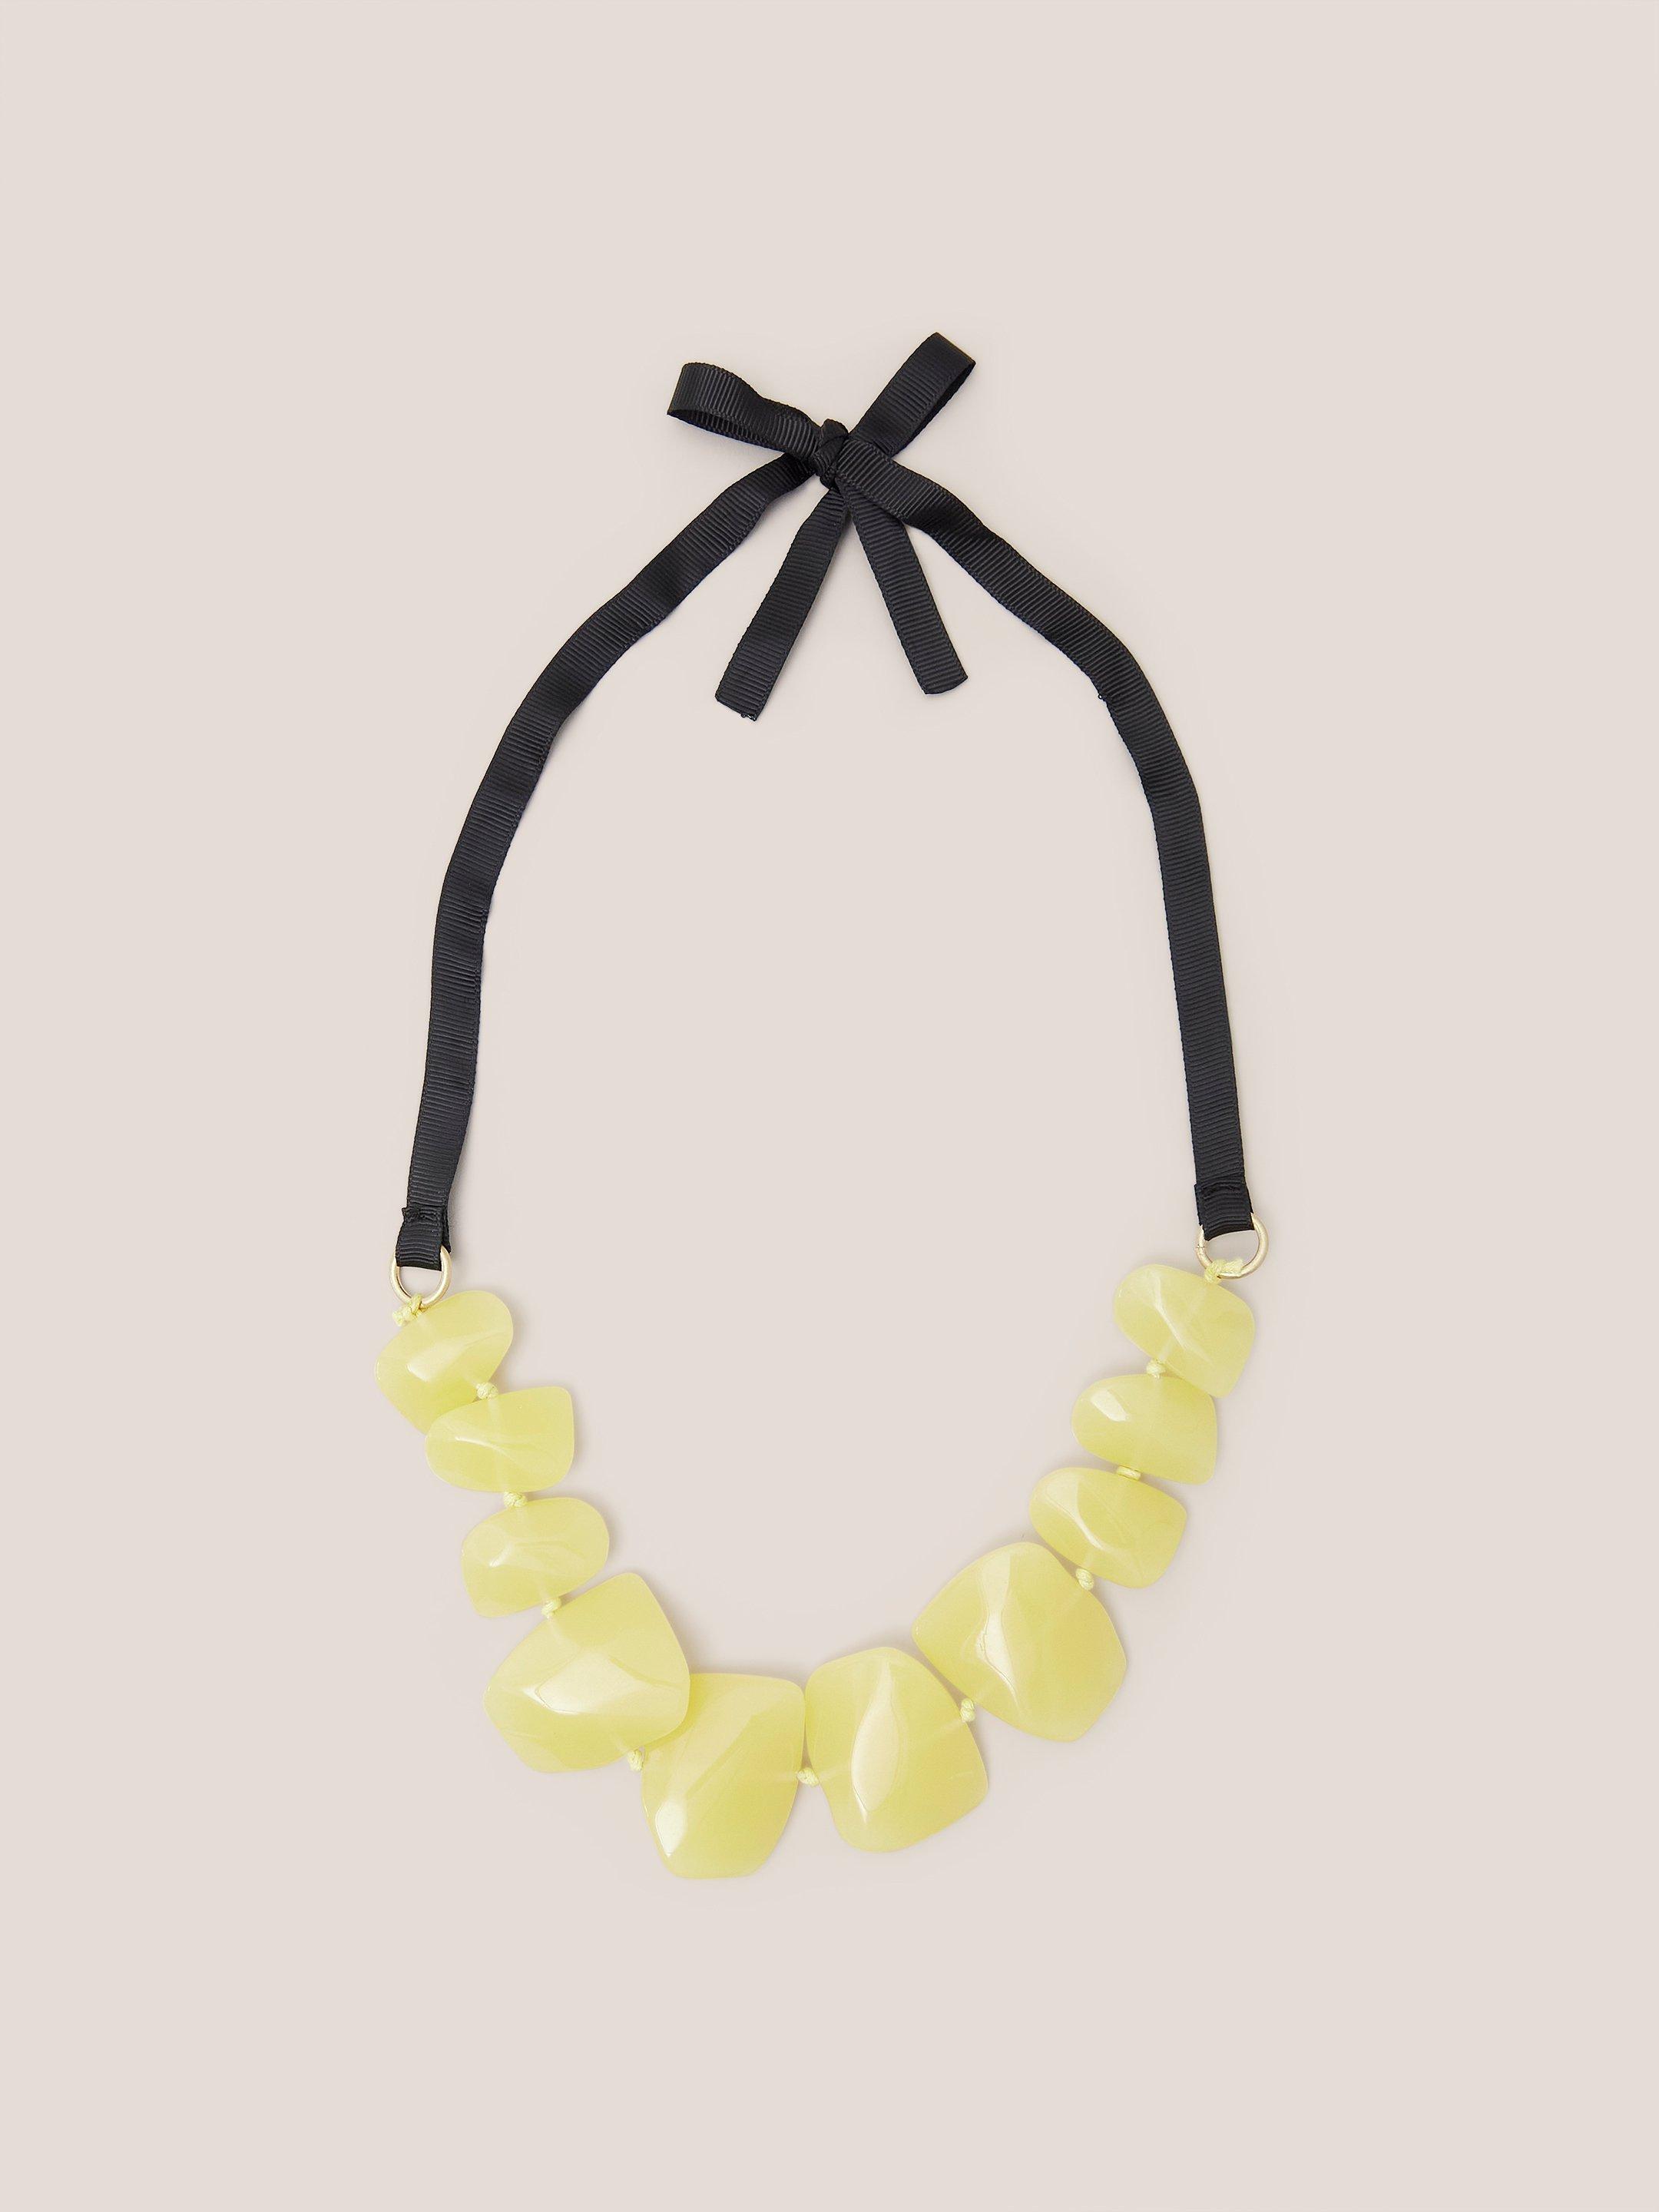 Magnolia Resin Necklace in MID YELLOW - FLAT FRONT